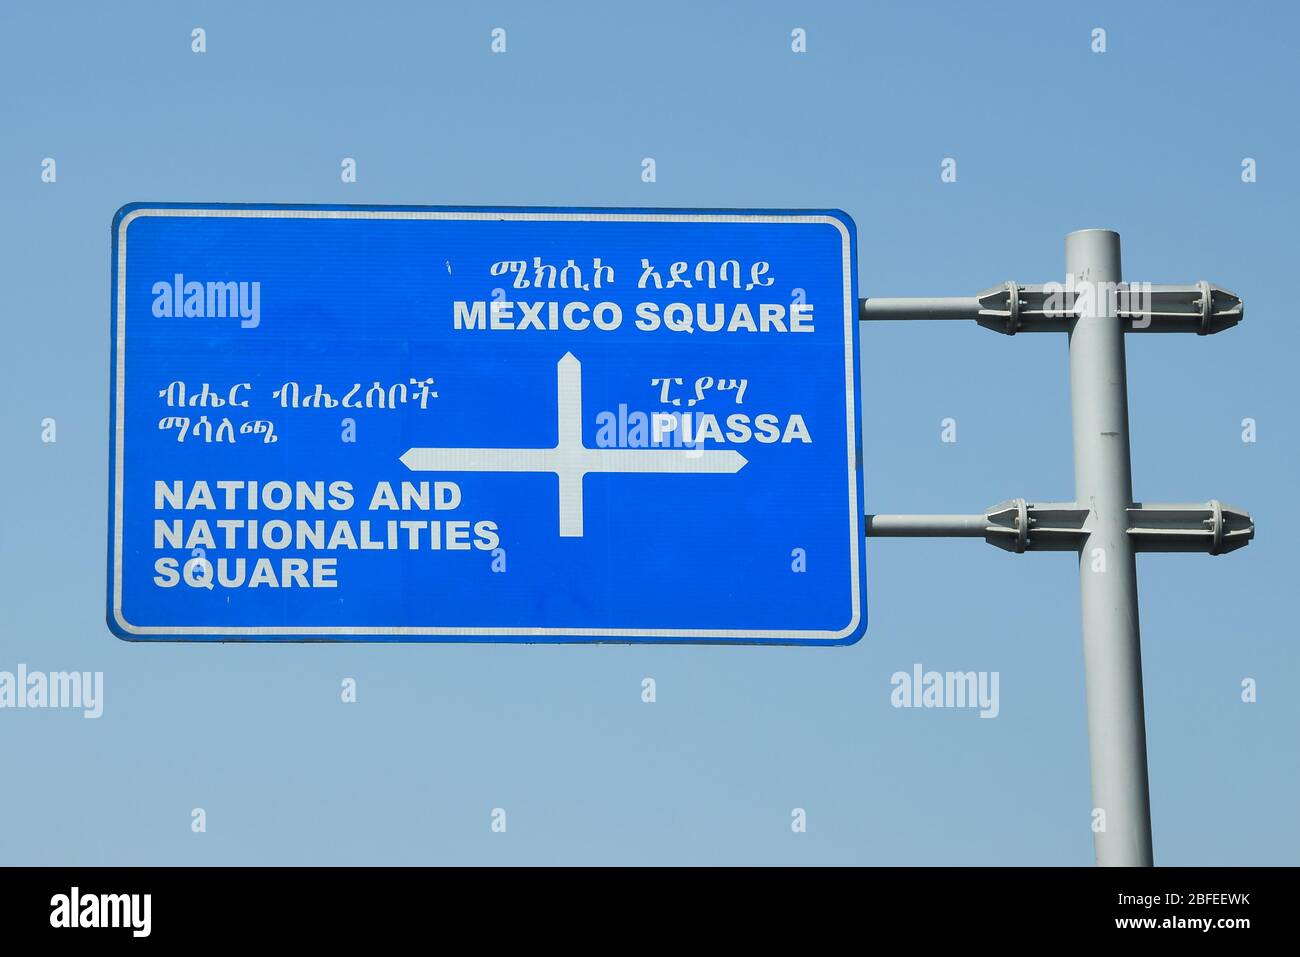 Road sign in Amharic and English language showing directions to Mexico Square, Piassa and Nations and Nationalities Square in Addis Abeba, Ethiopia. Stock Photo